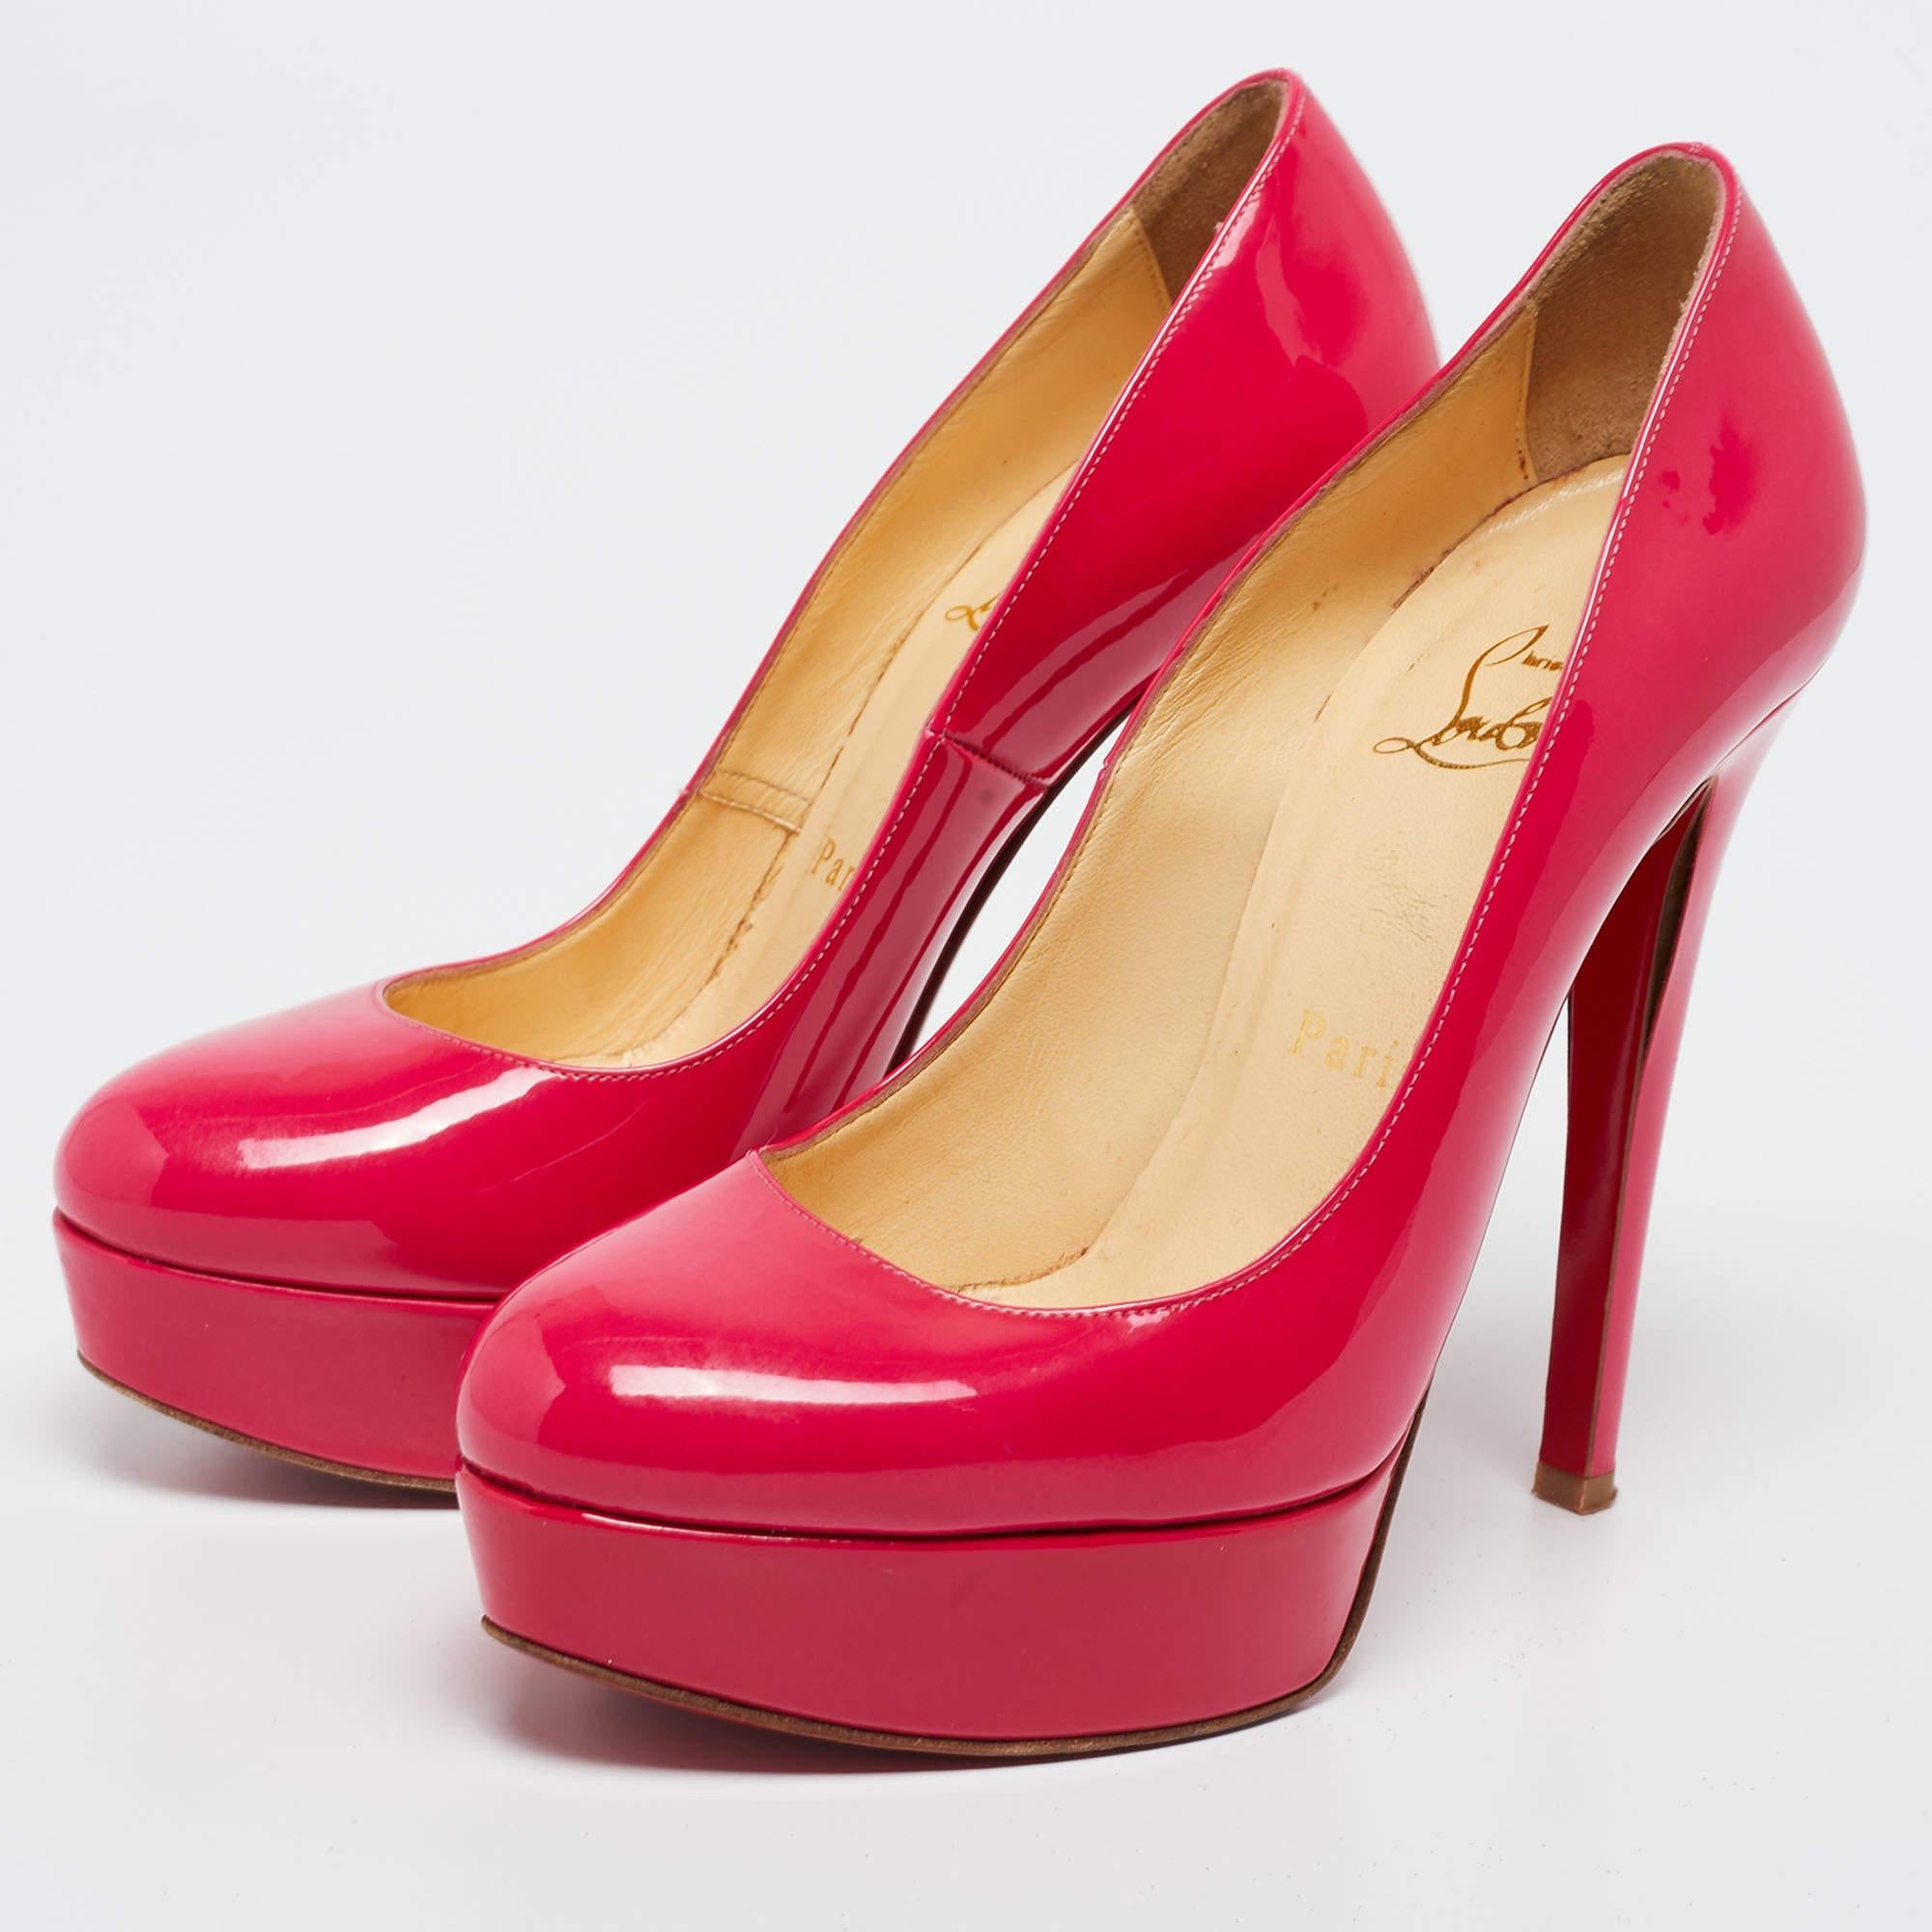 A classic to add to one's shoe collection is this pair. These Christian Louboutin beauties are covered in patent leather and styled with platforms, 12.5 cm heels, and signature red soles. Add these neon pink CL pumps to your closet today!

